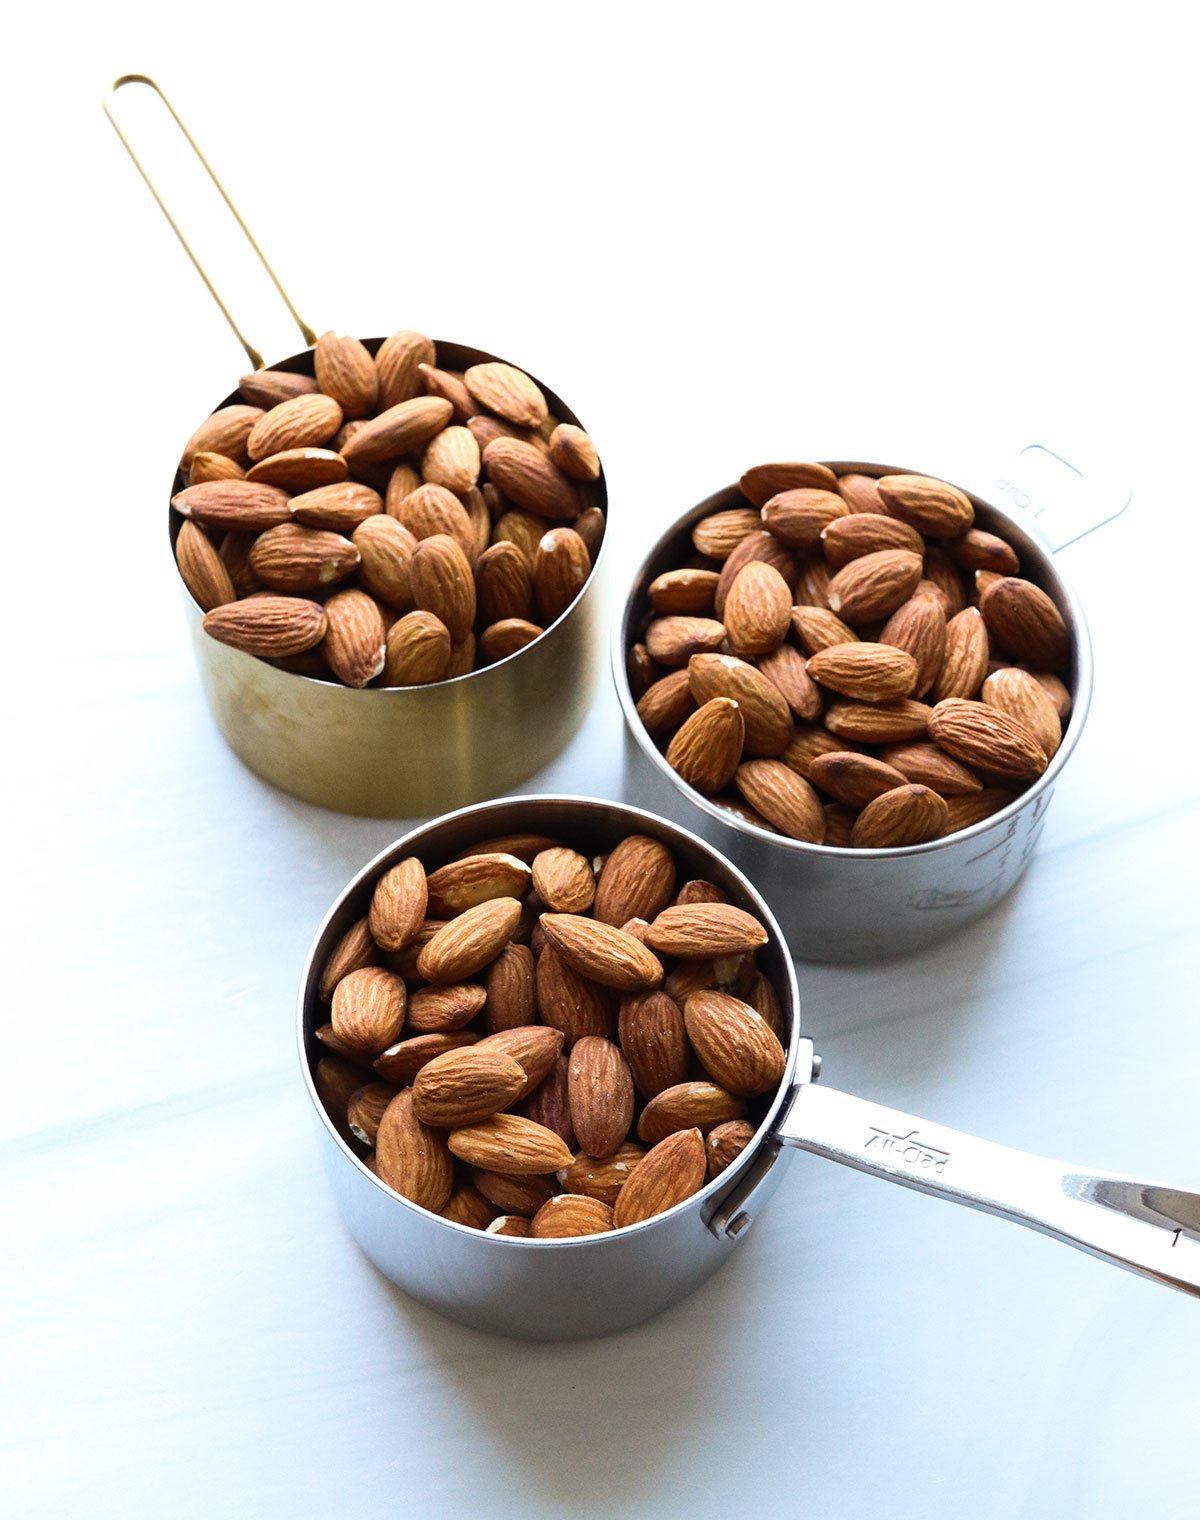 3 cups of almonds on a white surface.